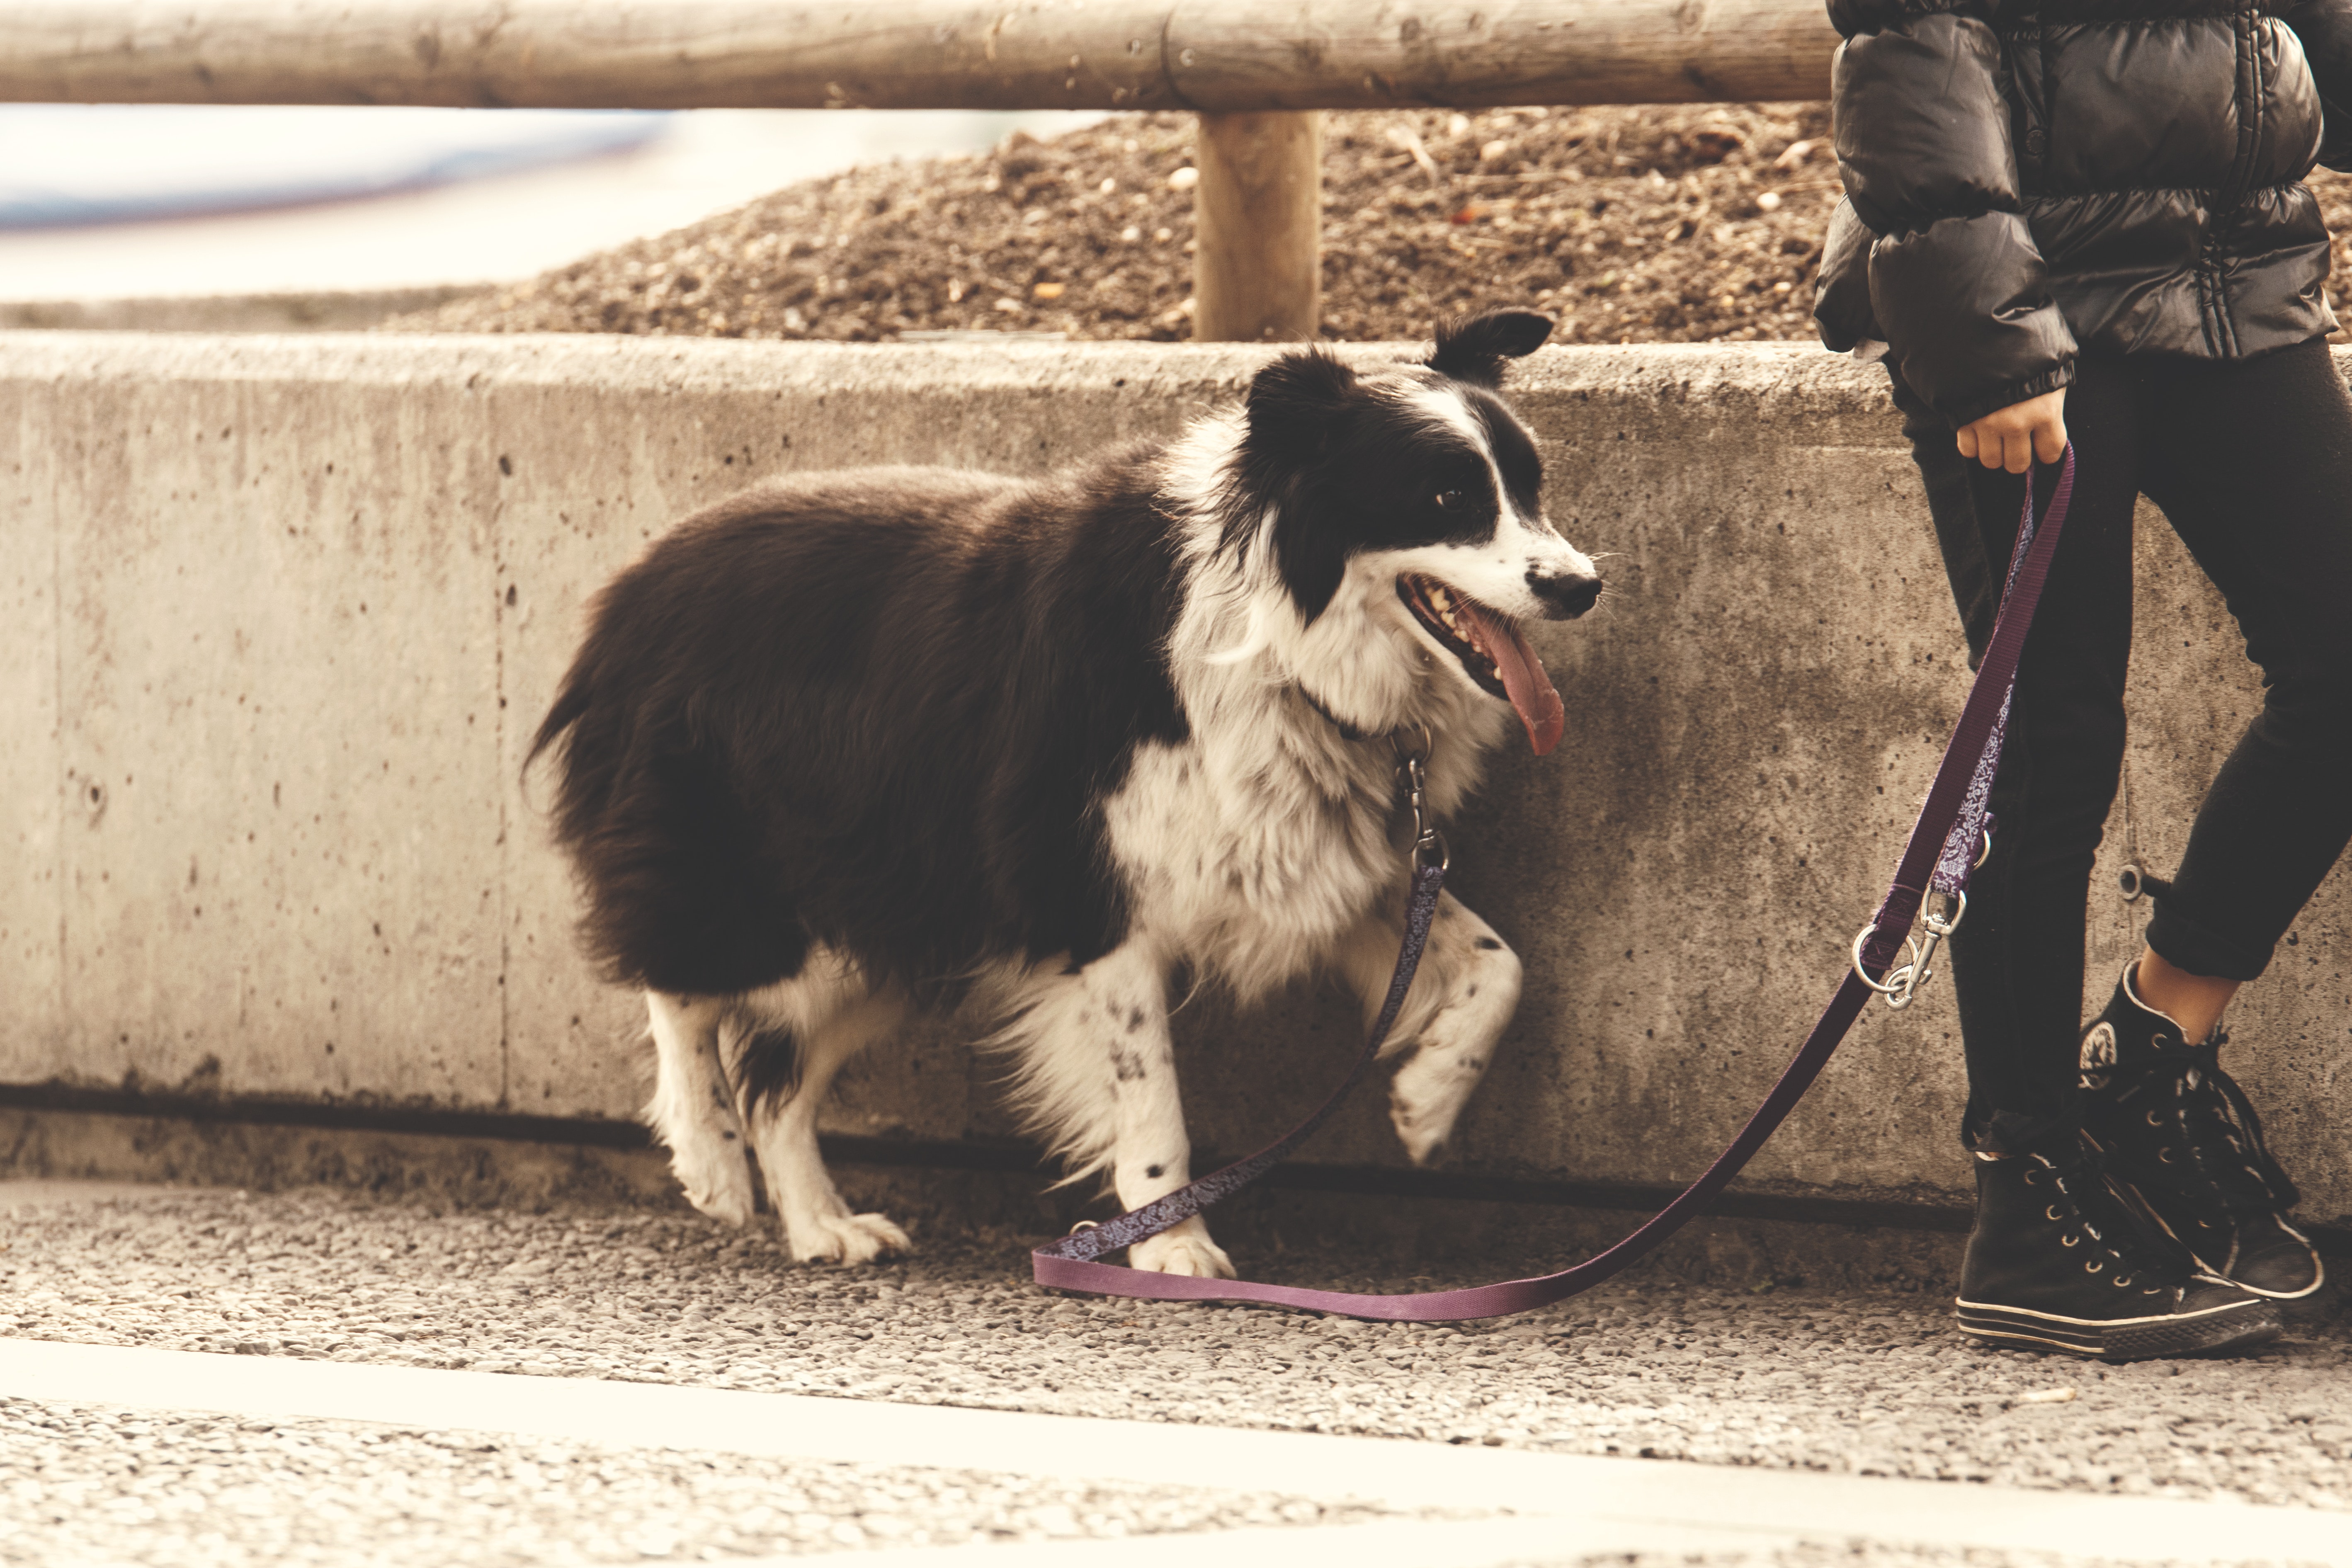 Hire These Dog Walkers in Uptown Dallas for Your Pet